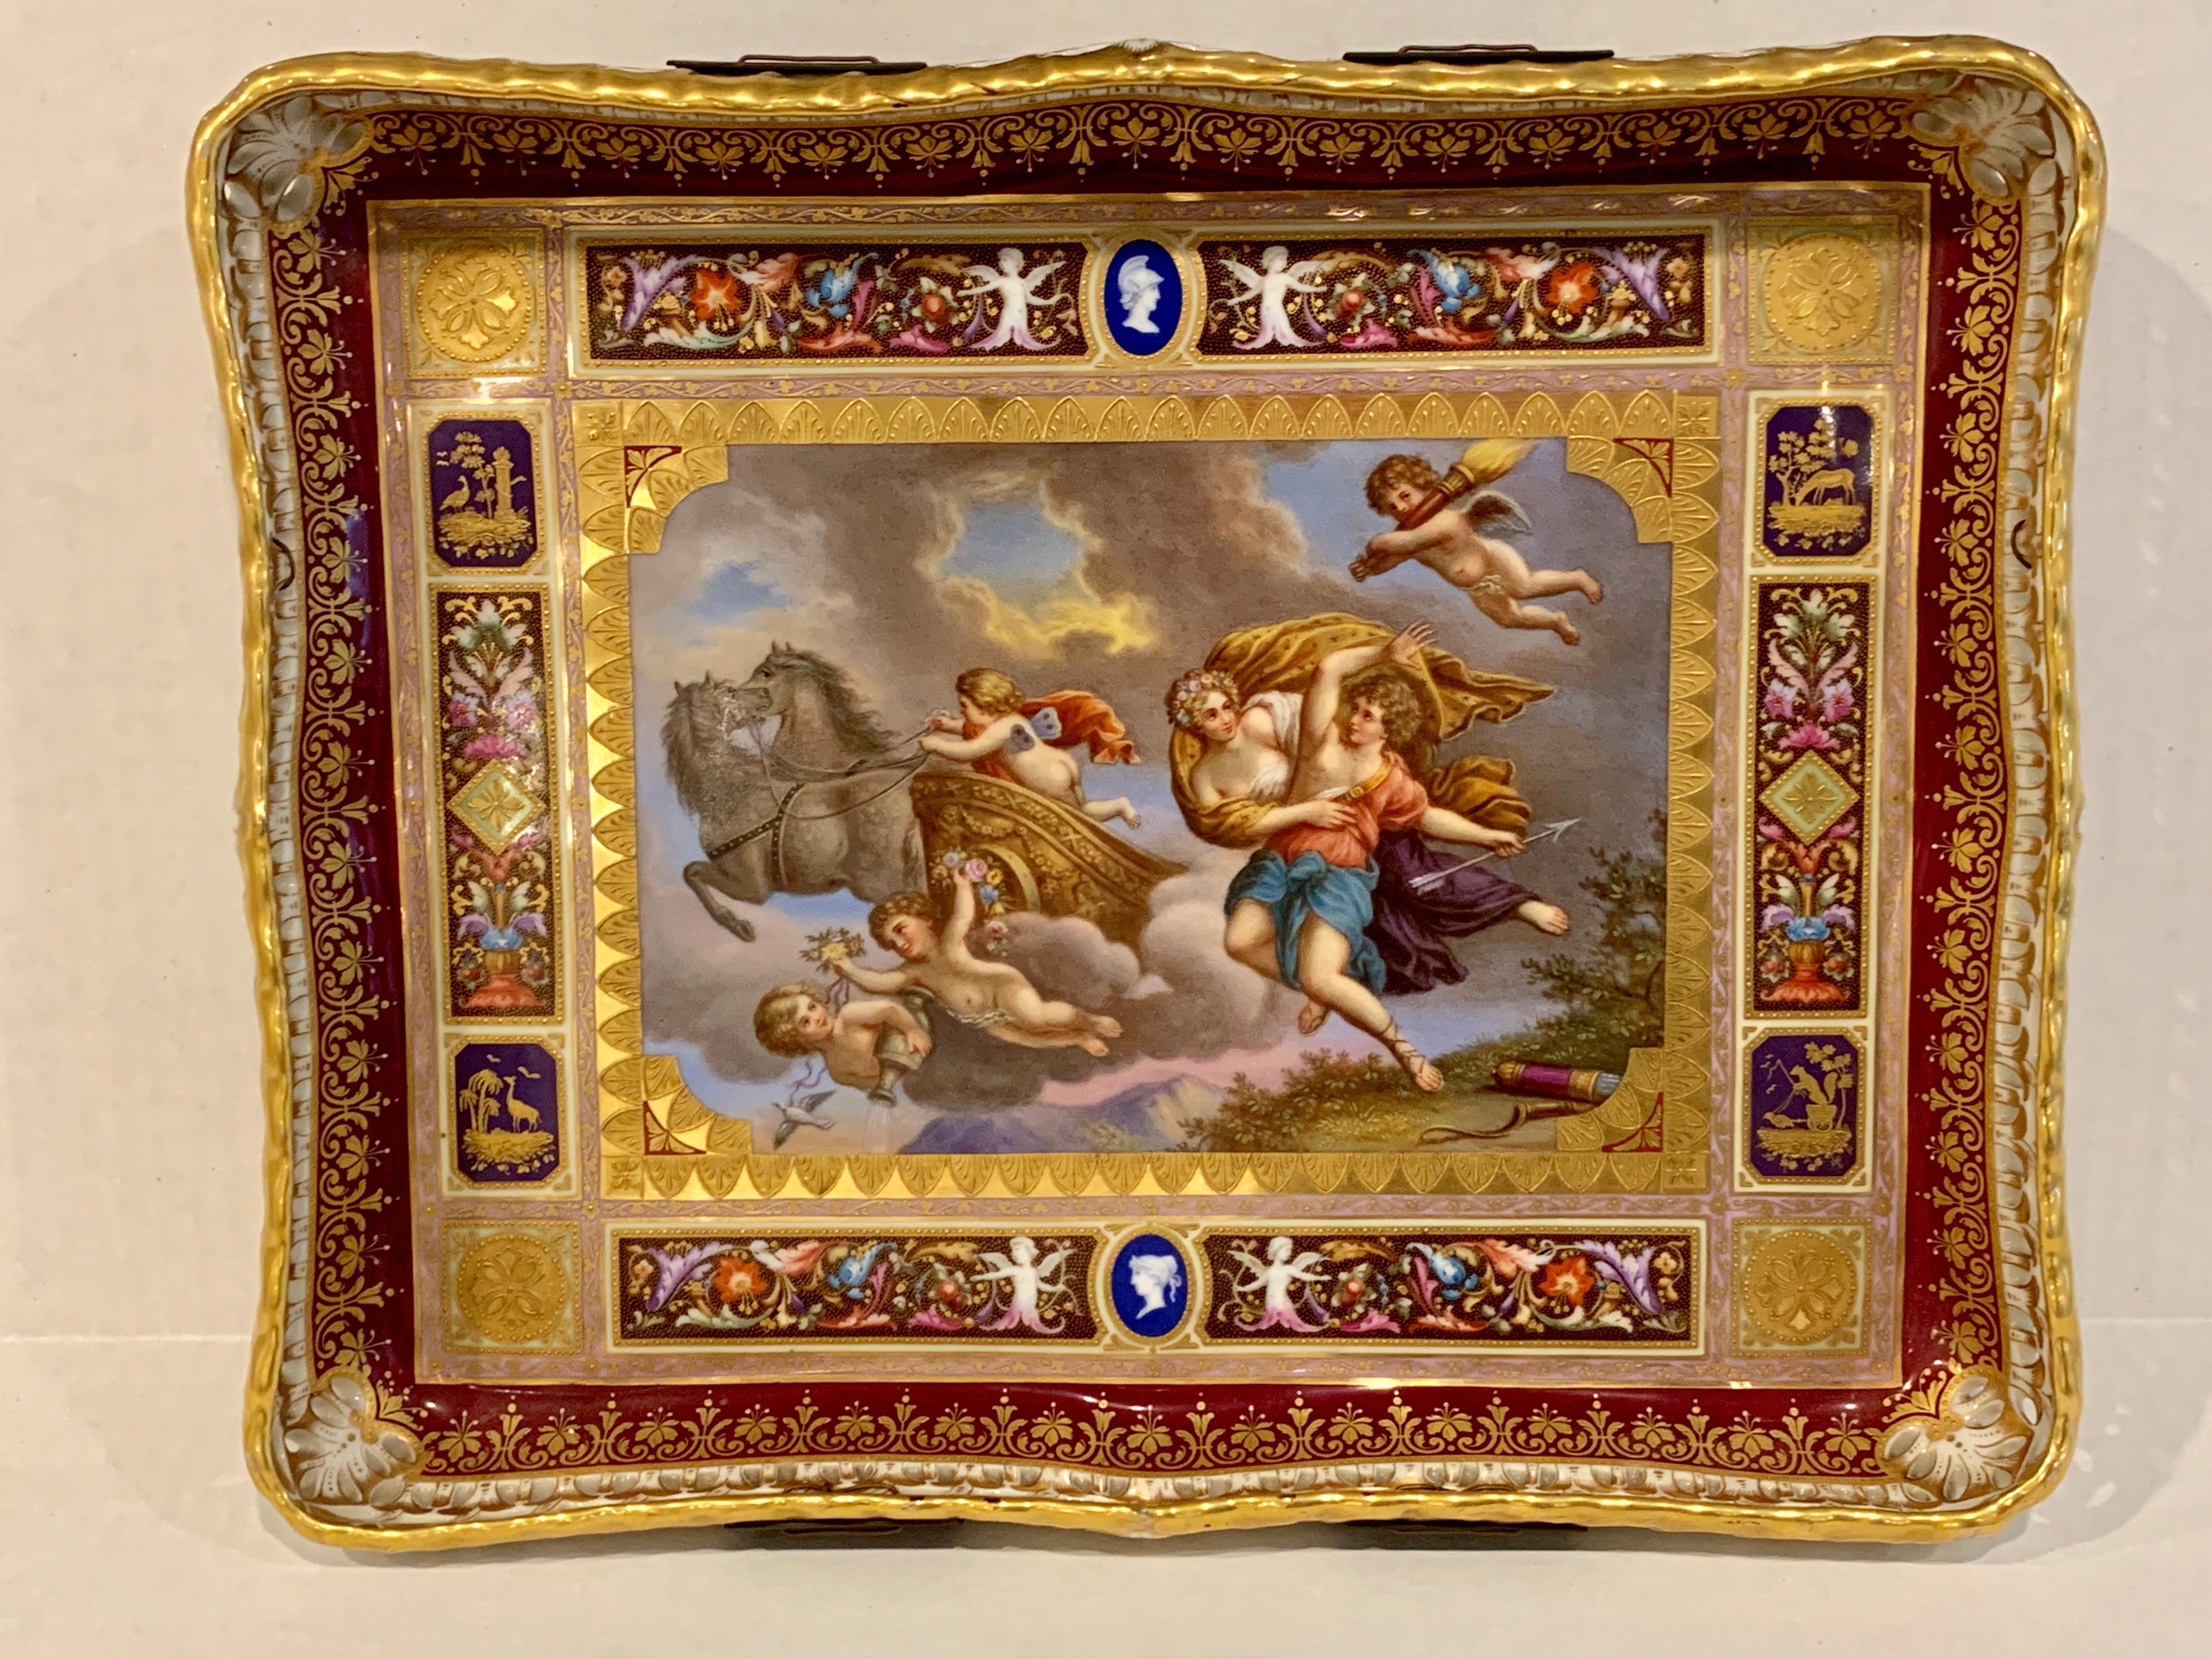 Royal Vienna pierced tray depicting cupid and the Charriot of Venus. Magnificently decorated, gilt and enameled gallery tray. Blue beehive mark, central panel of Aphrodite or Venus and cupids, paper label on back 